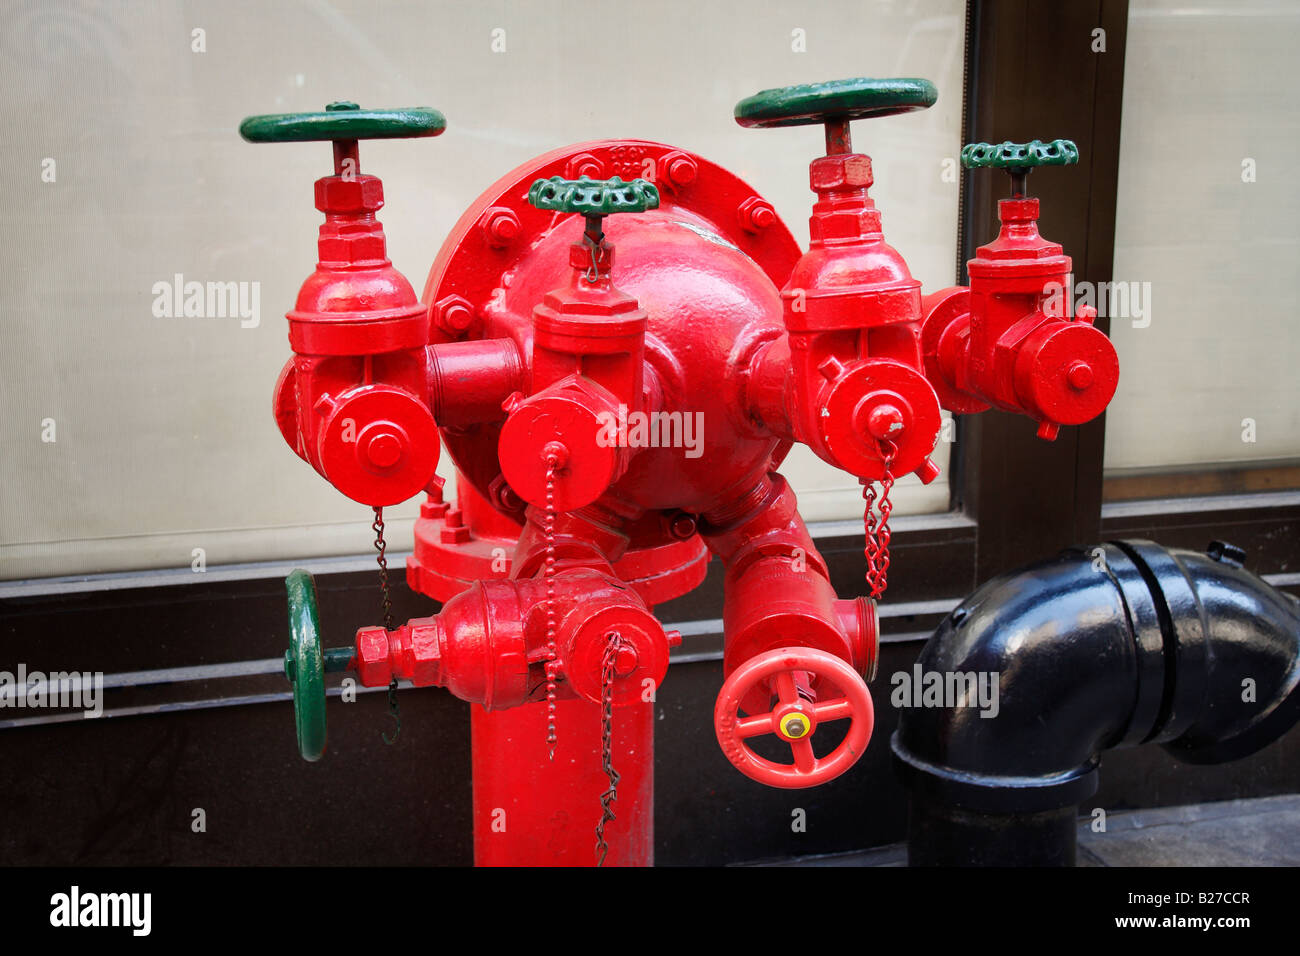 A 6-valves fire hydrant in East Village - New York City, USA Stock Photo